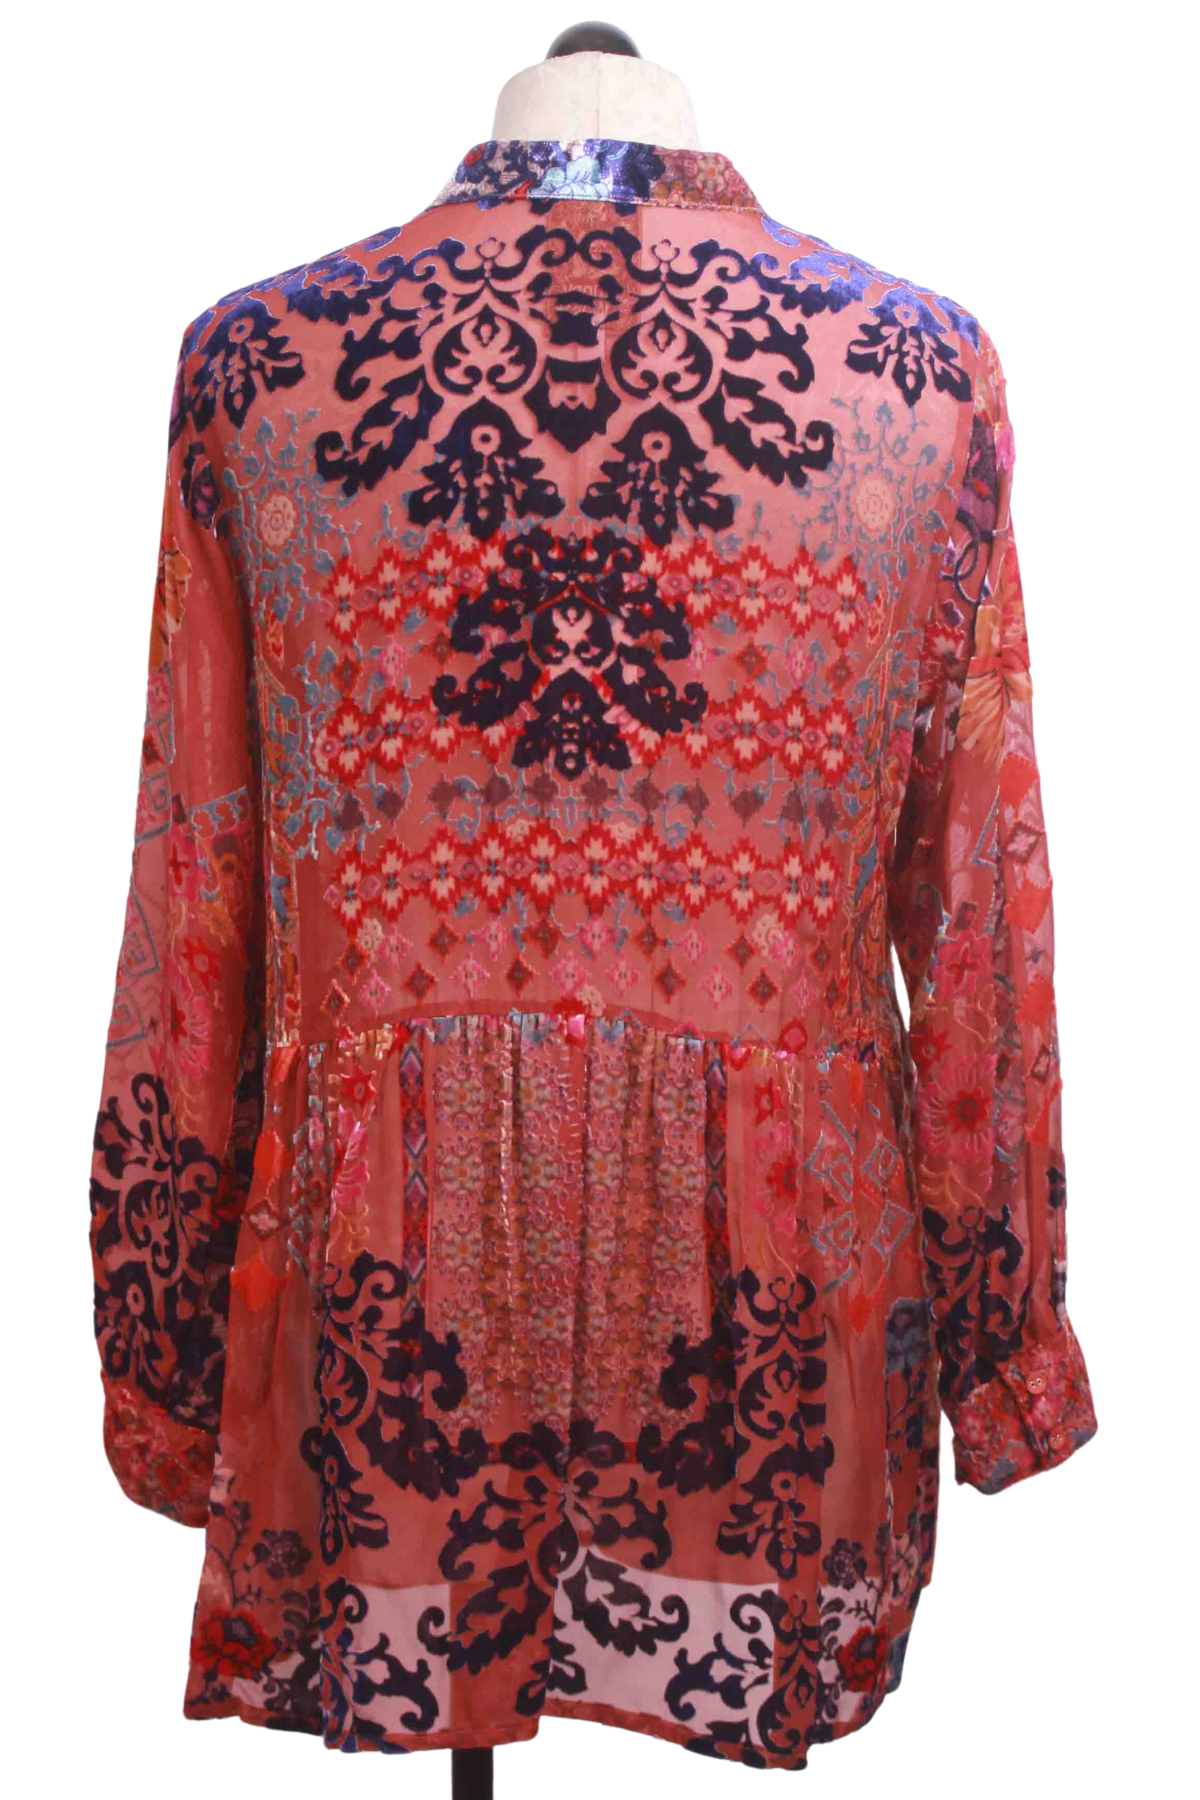 back view of Multi Syriah Burnout Monroe Tunic by Johnny Was